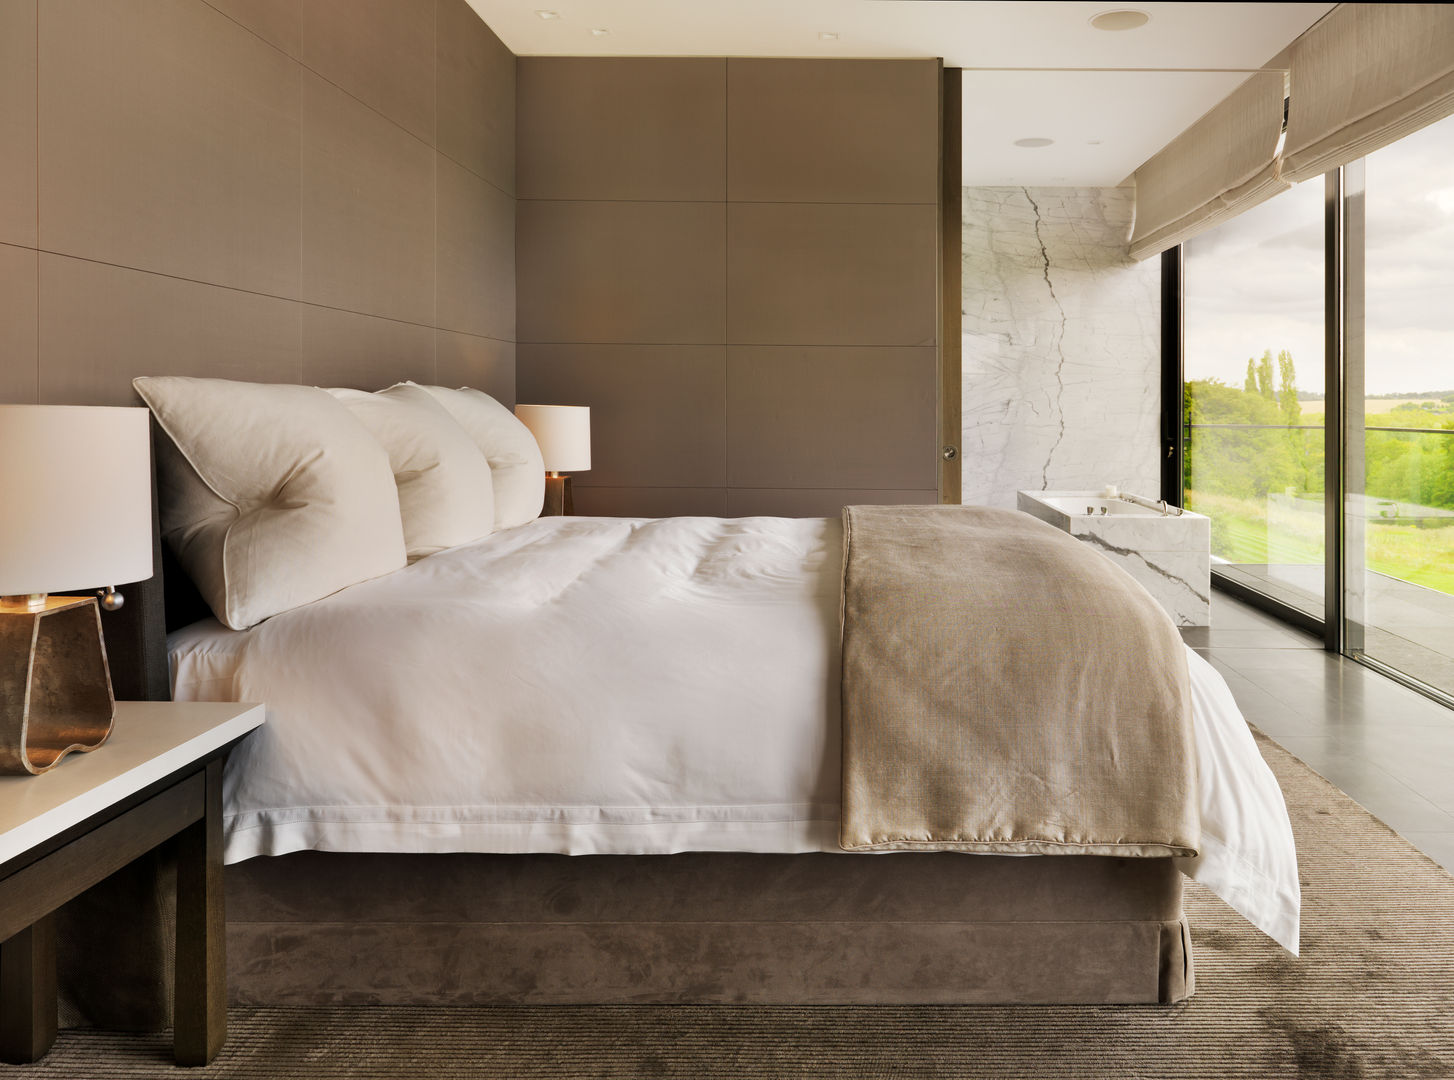 Berkshire, Gregory Phillips Architects Gregory Phillips Architects Kamar Tidur Modern